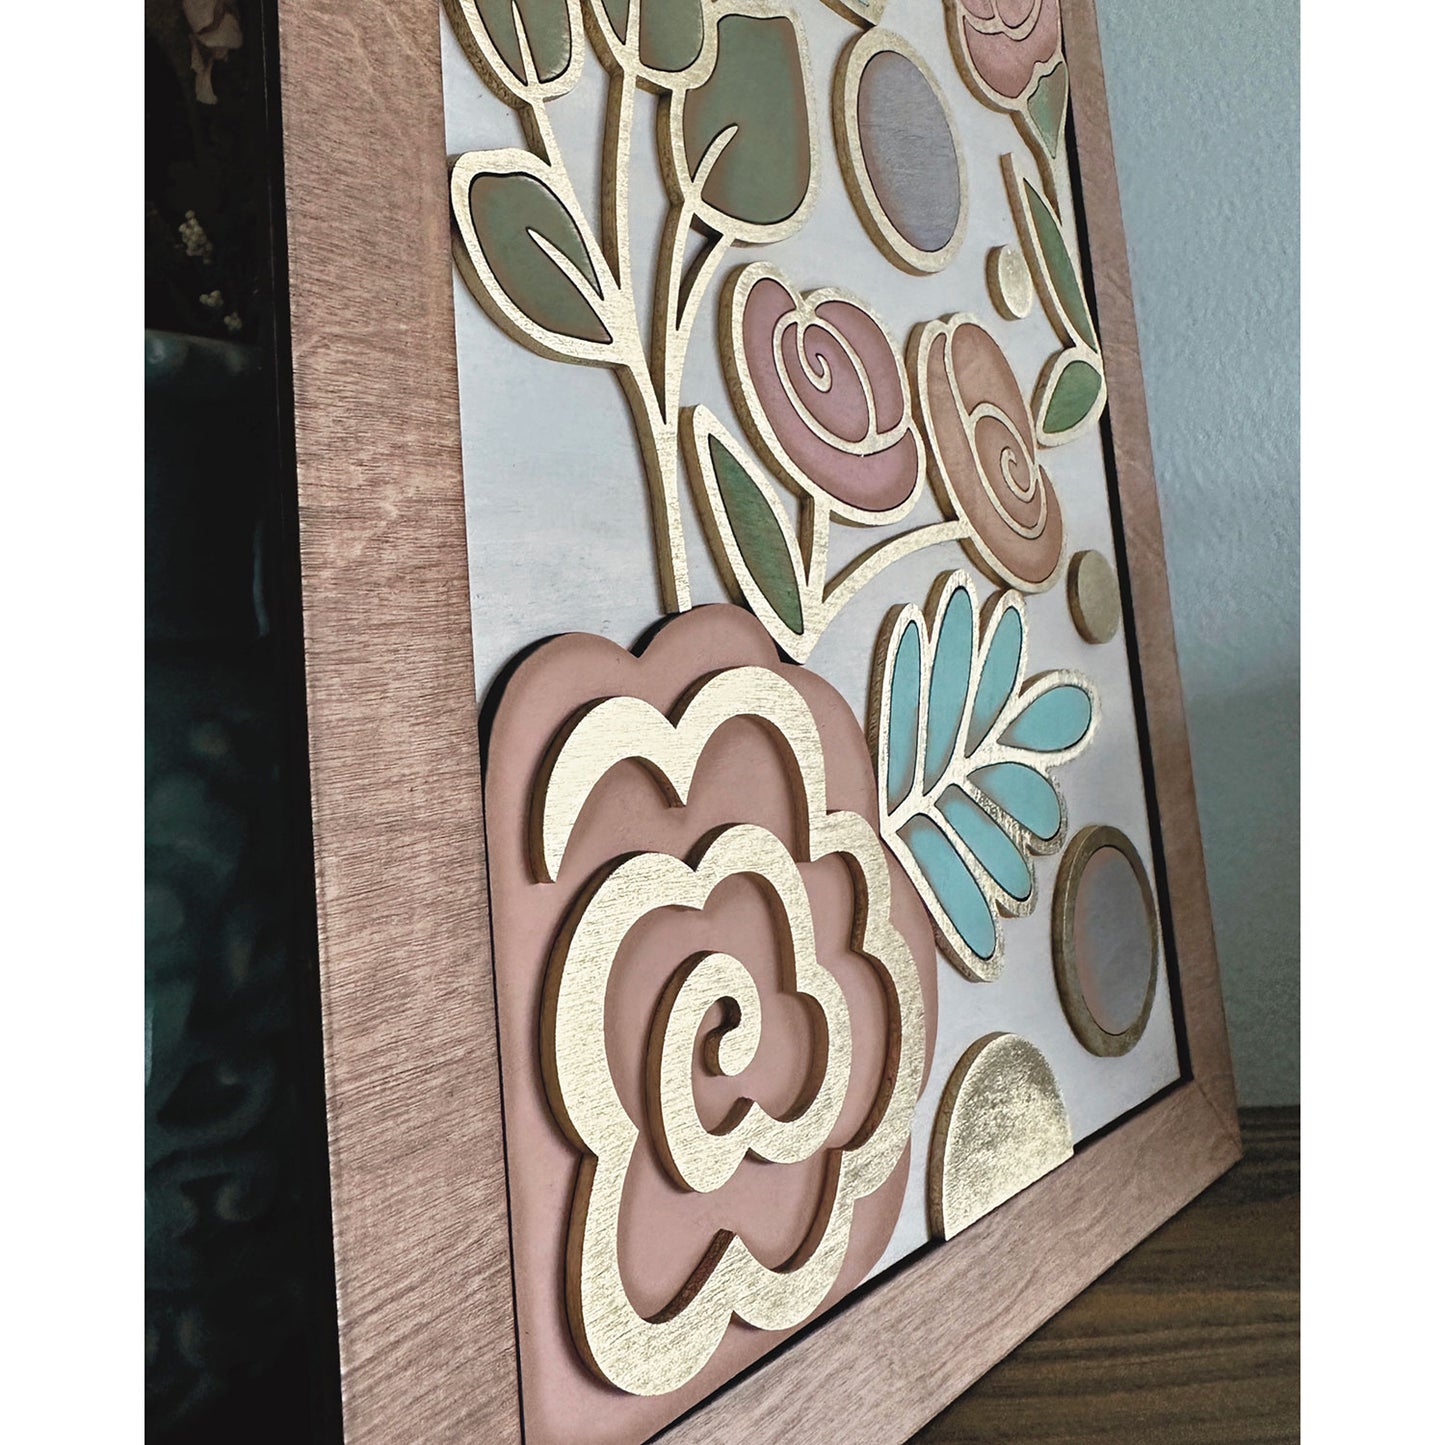 Tall Whimsical Floral Art Piece with Backer and Frame